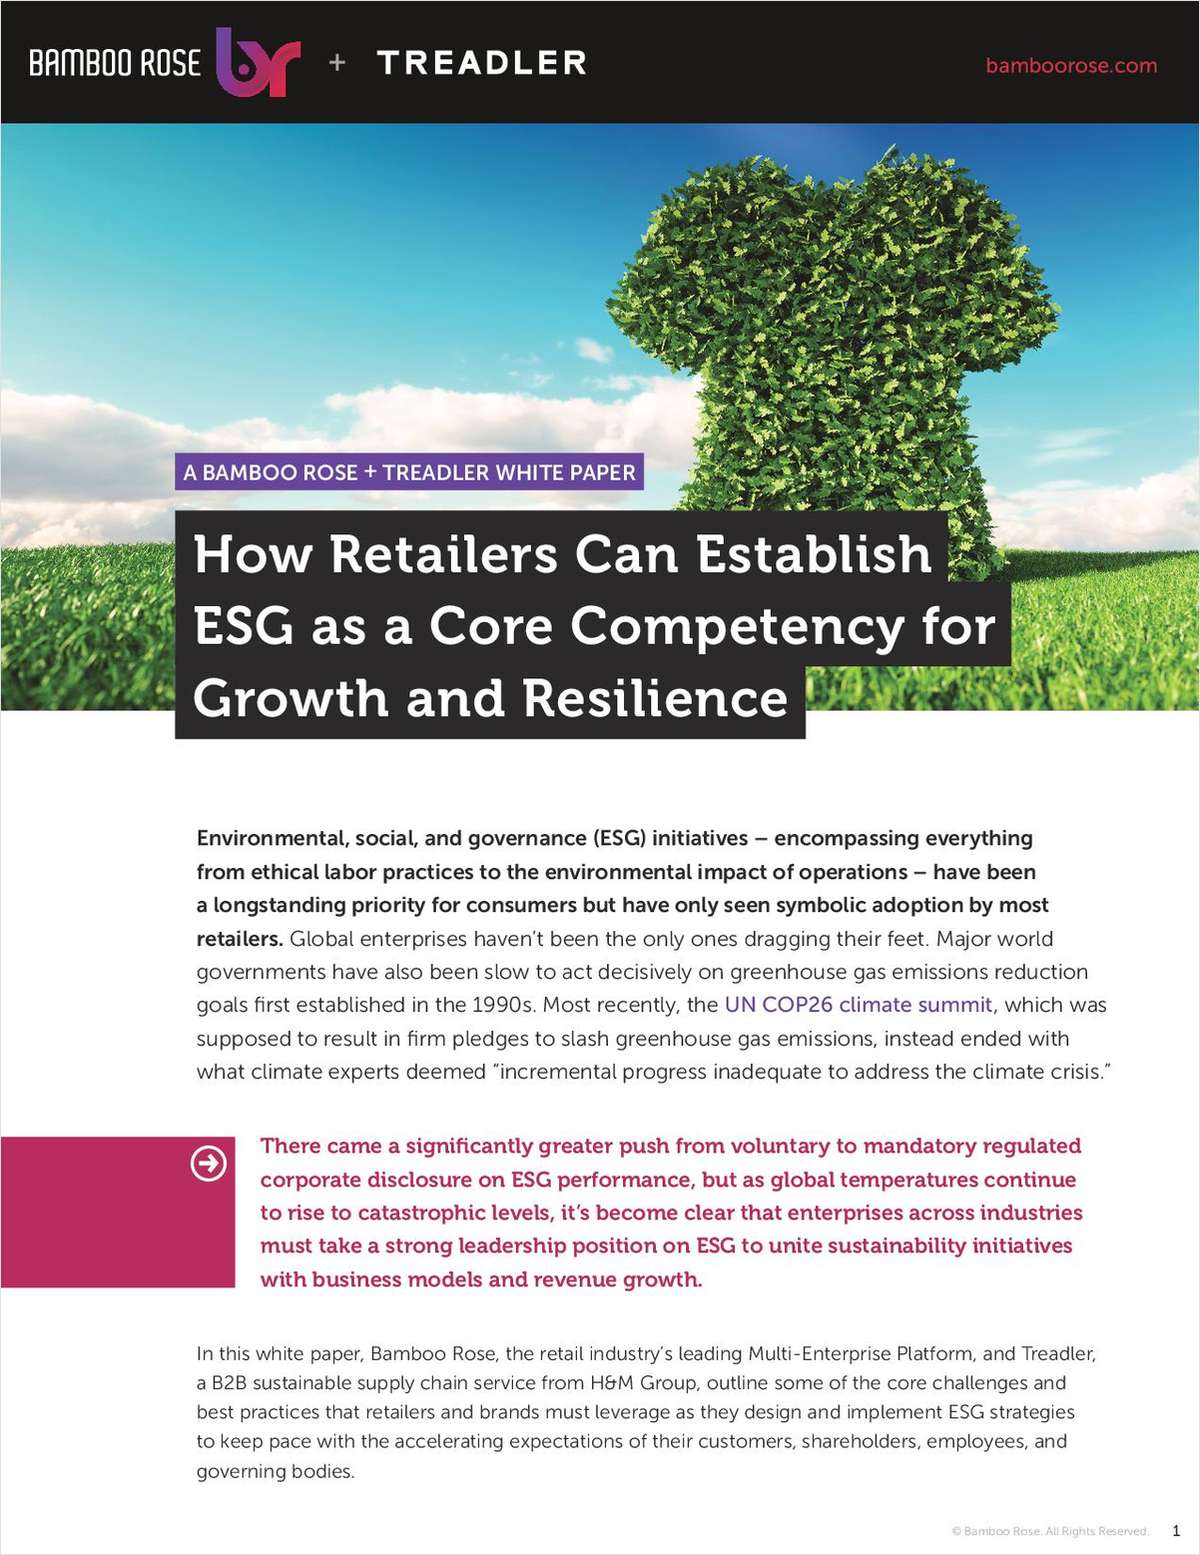 How Retailers Can Establish ESG as a Core Competency for Growth and Resilience